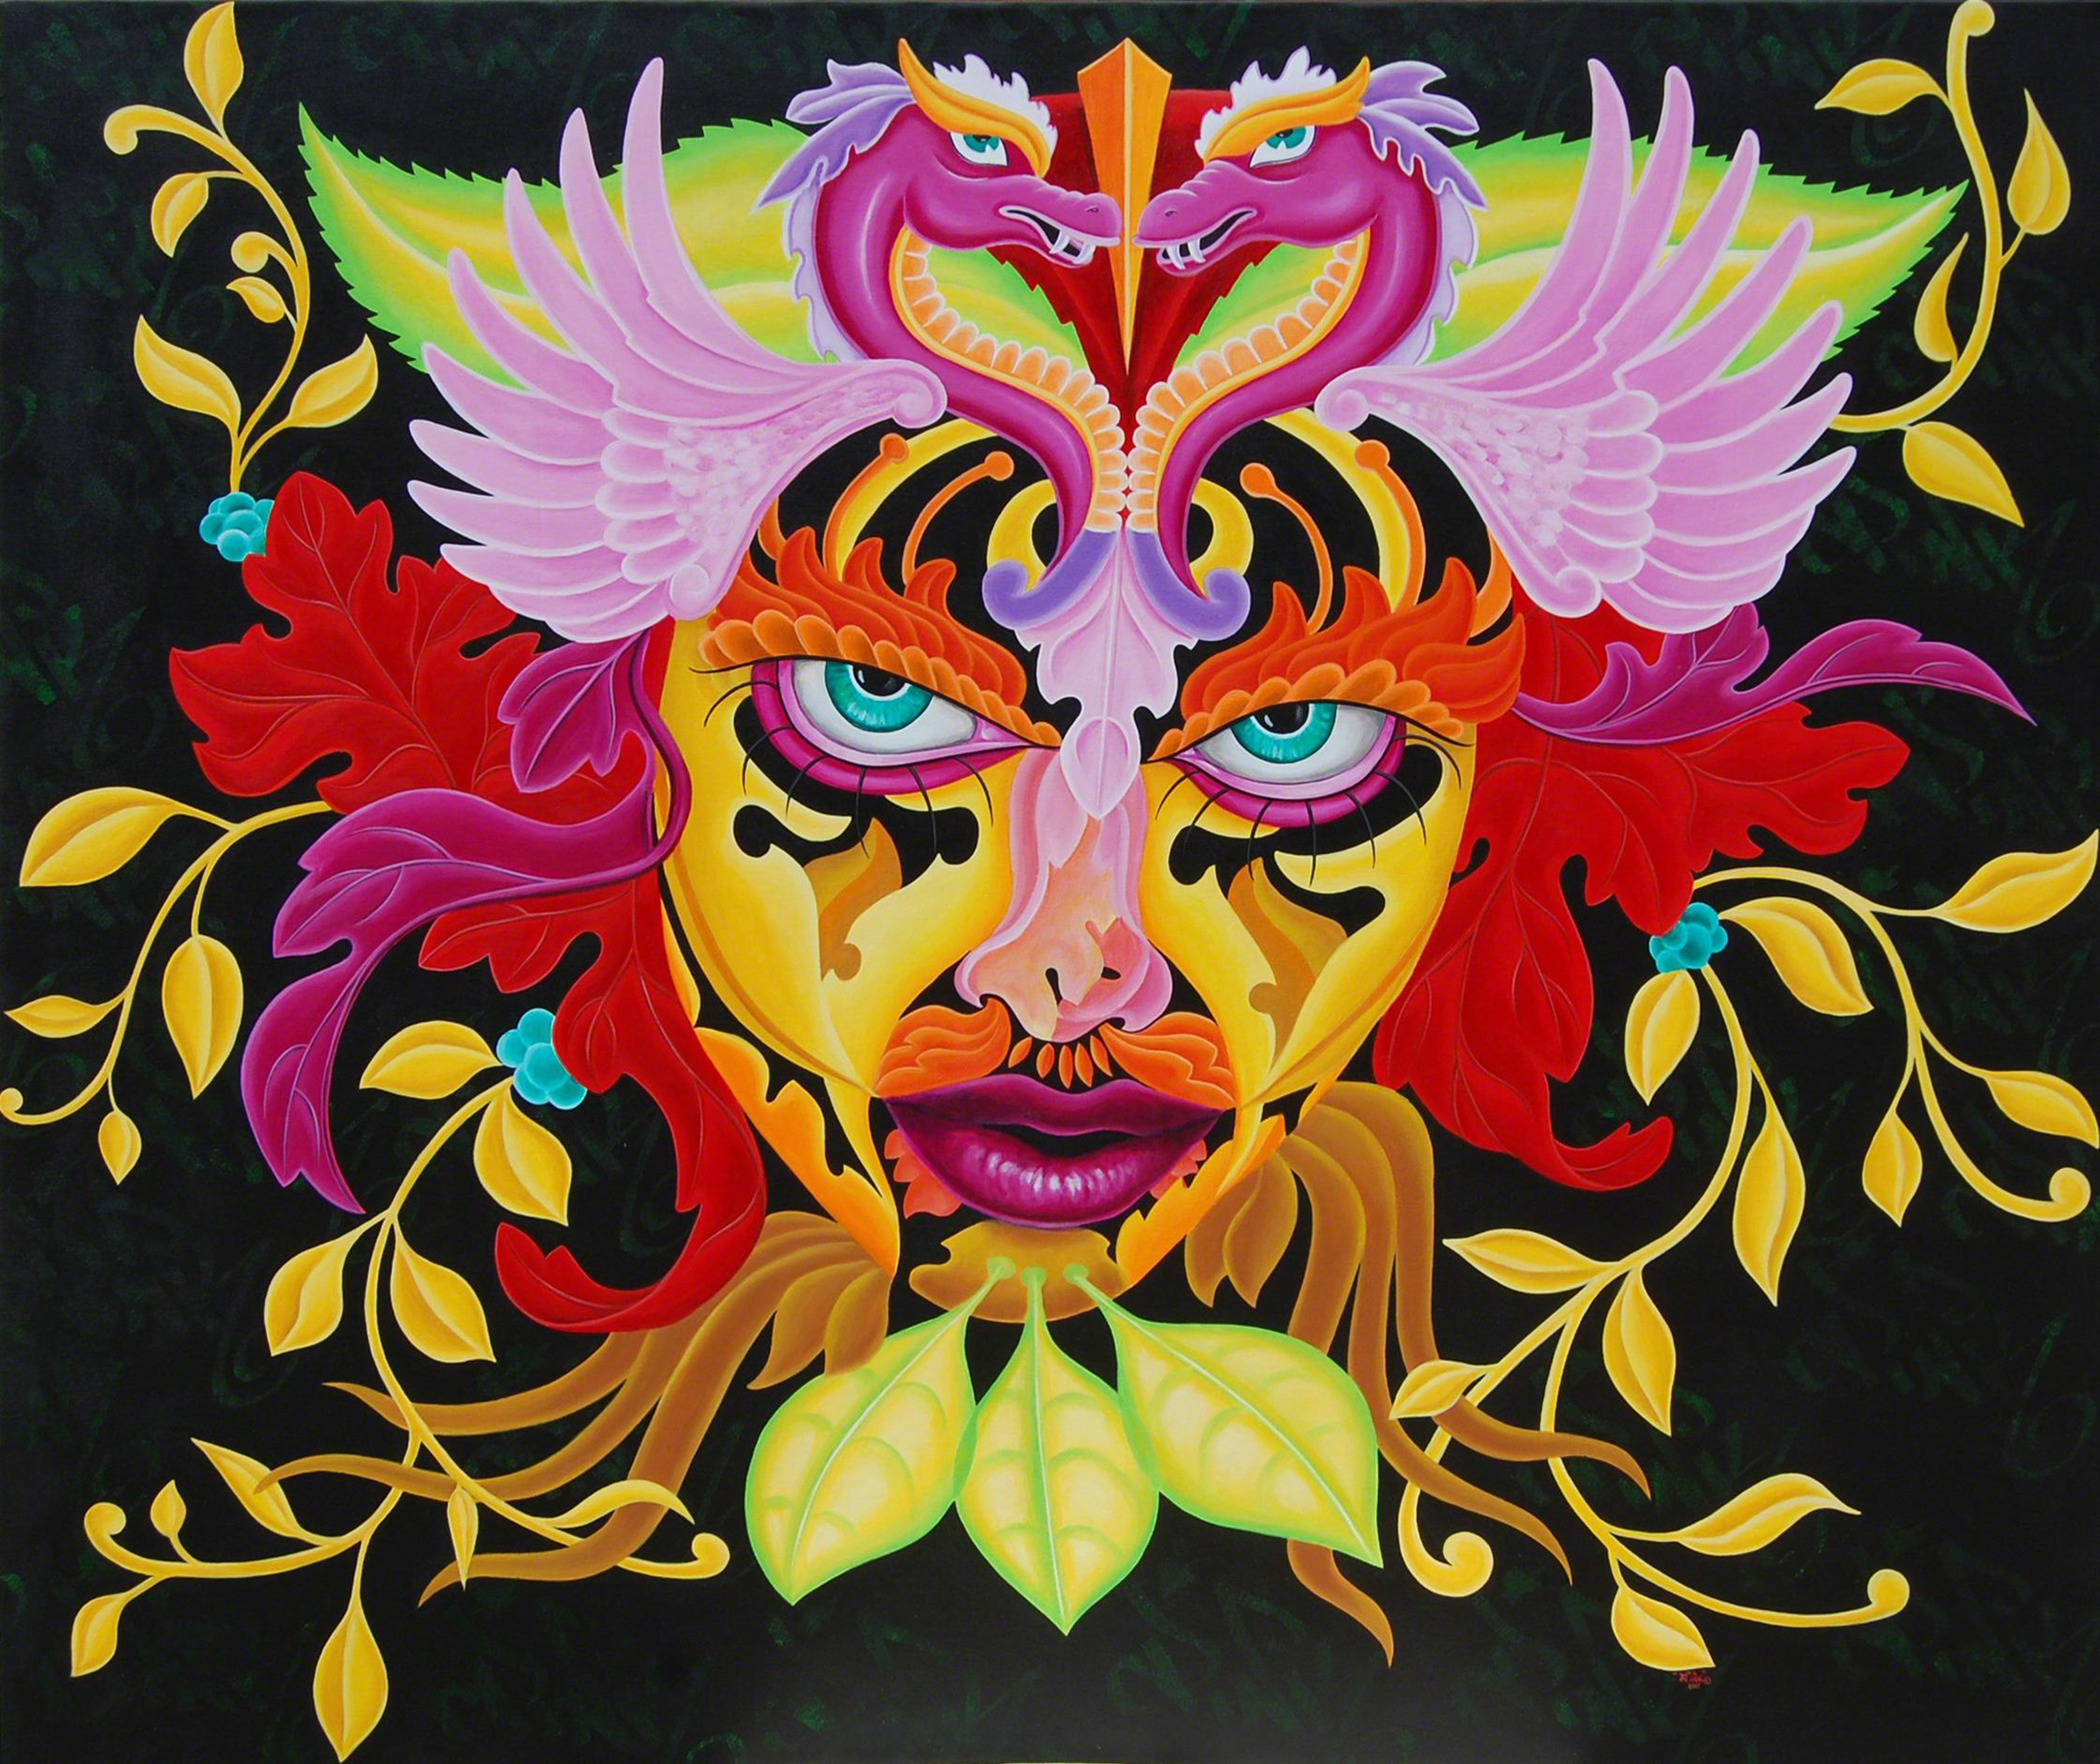 Lady Pink, “Lady of the Leaf,” acrylic on canvas, 56” x 66”, 2011. In a private collection. Lady Pink will present a Hixson-Lied Visiting Artist Lecture on Sept. 27.